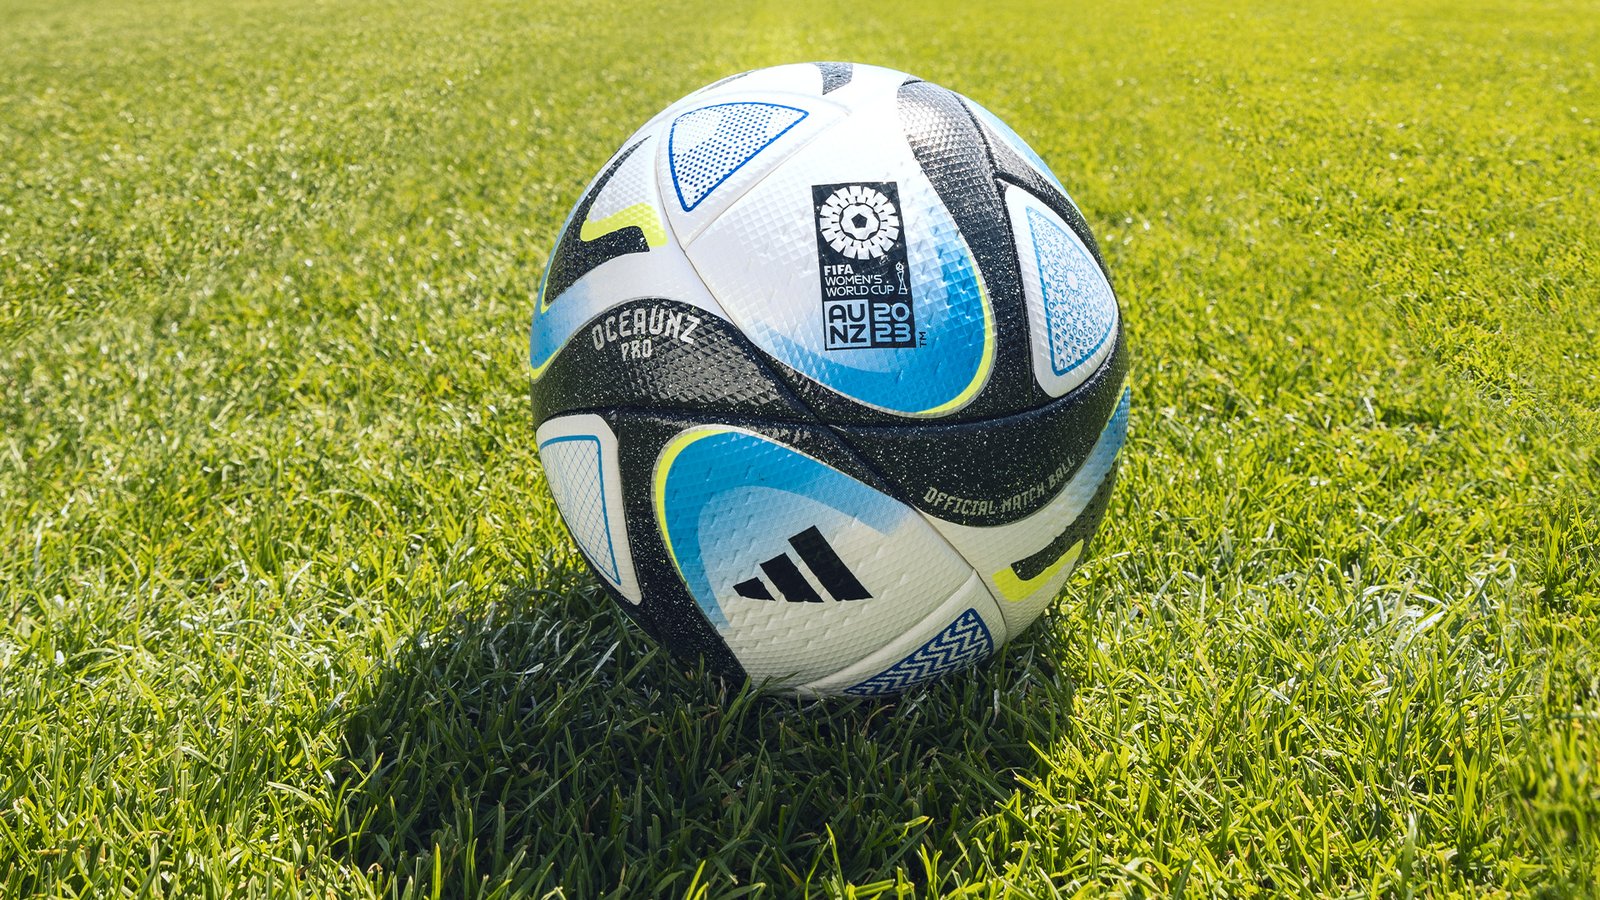 ADIDAS INTRODUCES THE OFFICIAL MATCHBALL OF THE 2023 AUSTRALIA AND NEW ZEALAND WOMEN'S WORLD CUP © Copyright PLPG GLOBAL MEDIA 2023